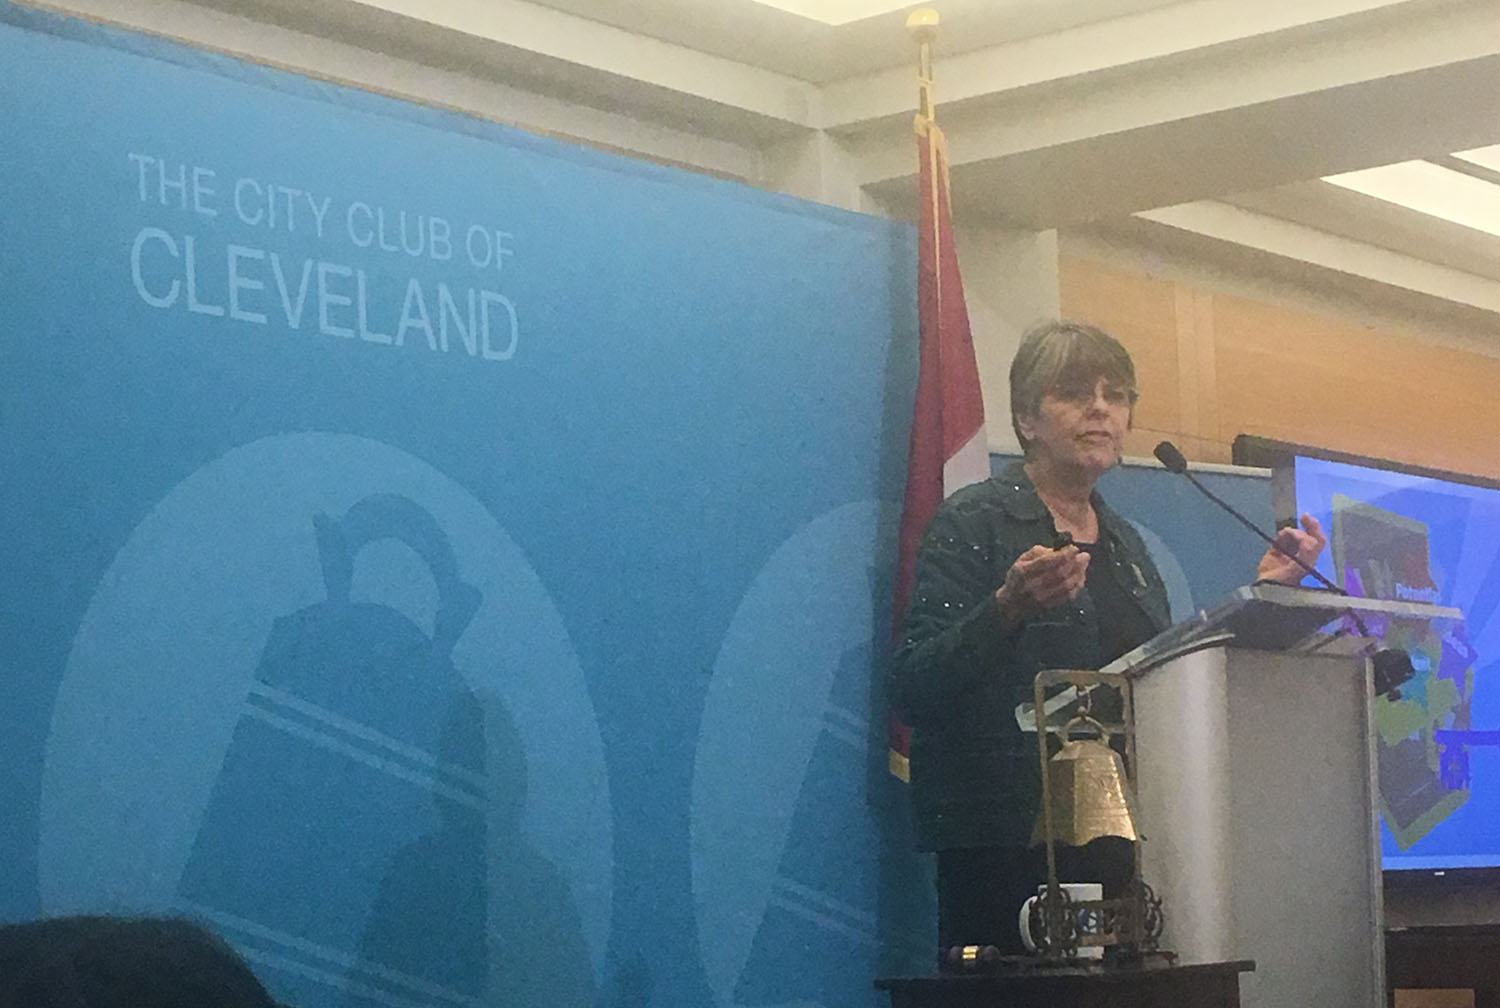 Mary Beth Tinker speaking at a podium with a blue backdrop that says "The City Club of Cleveland"